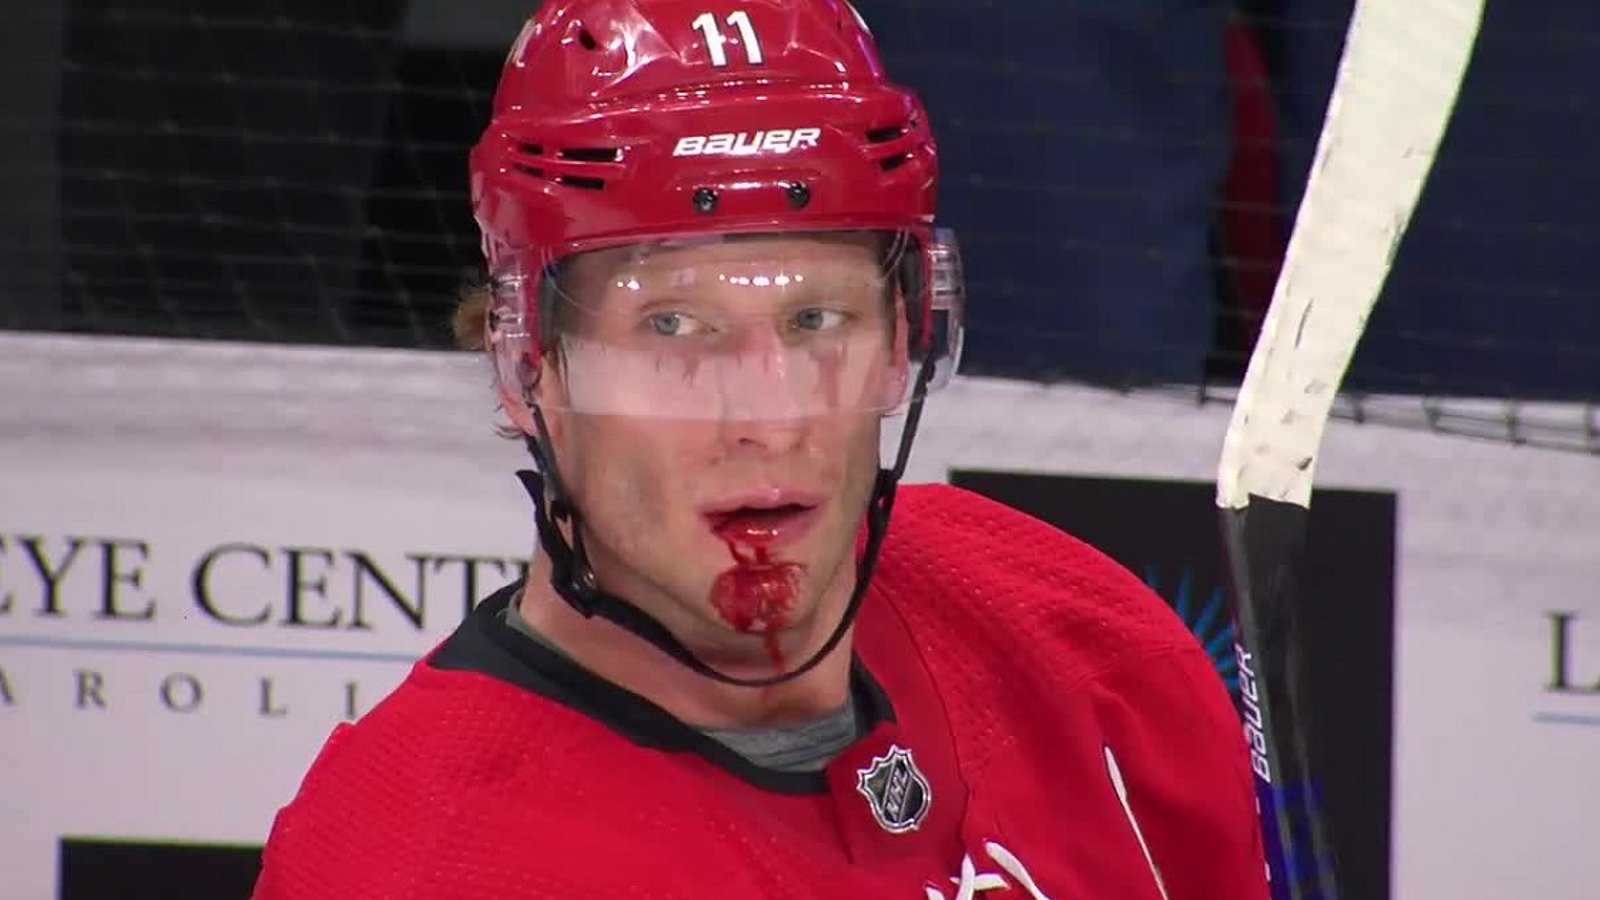 Jordan Staal busted open but goes unnoticed by NHL officials.